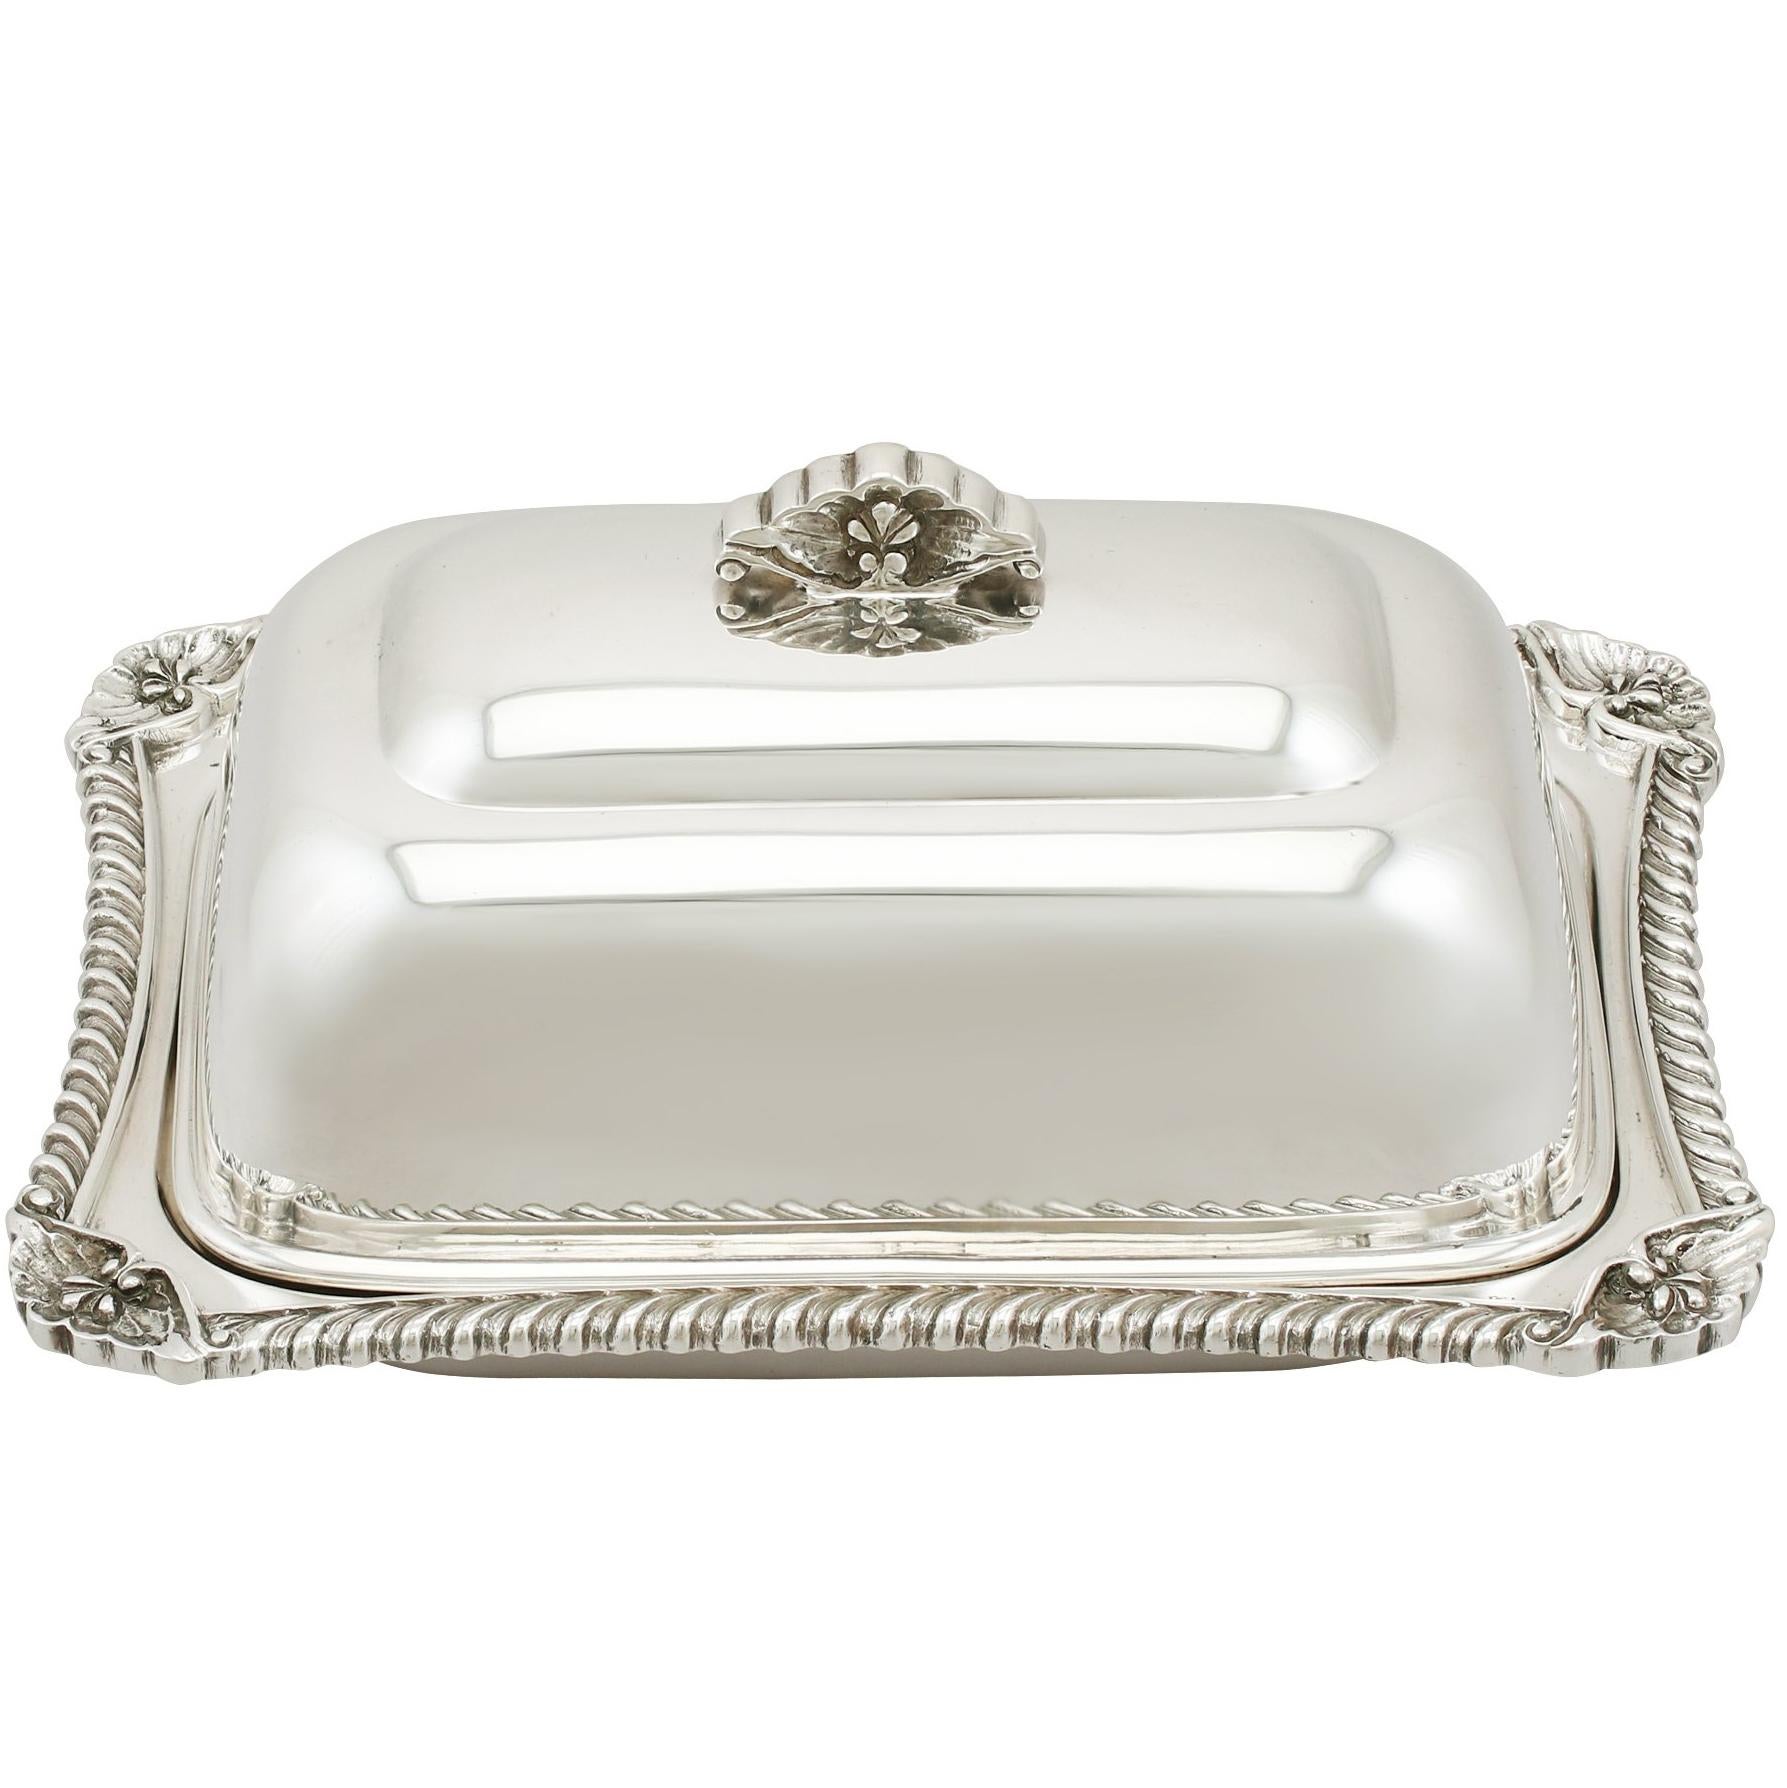 1960s Sterling Silver Butter Dish and Cover by Roberts & Belk Ltd